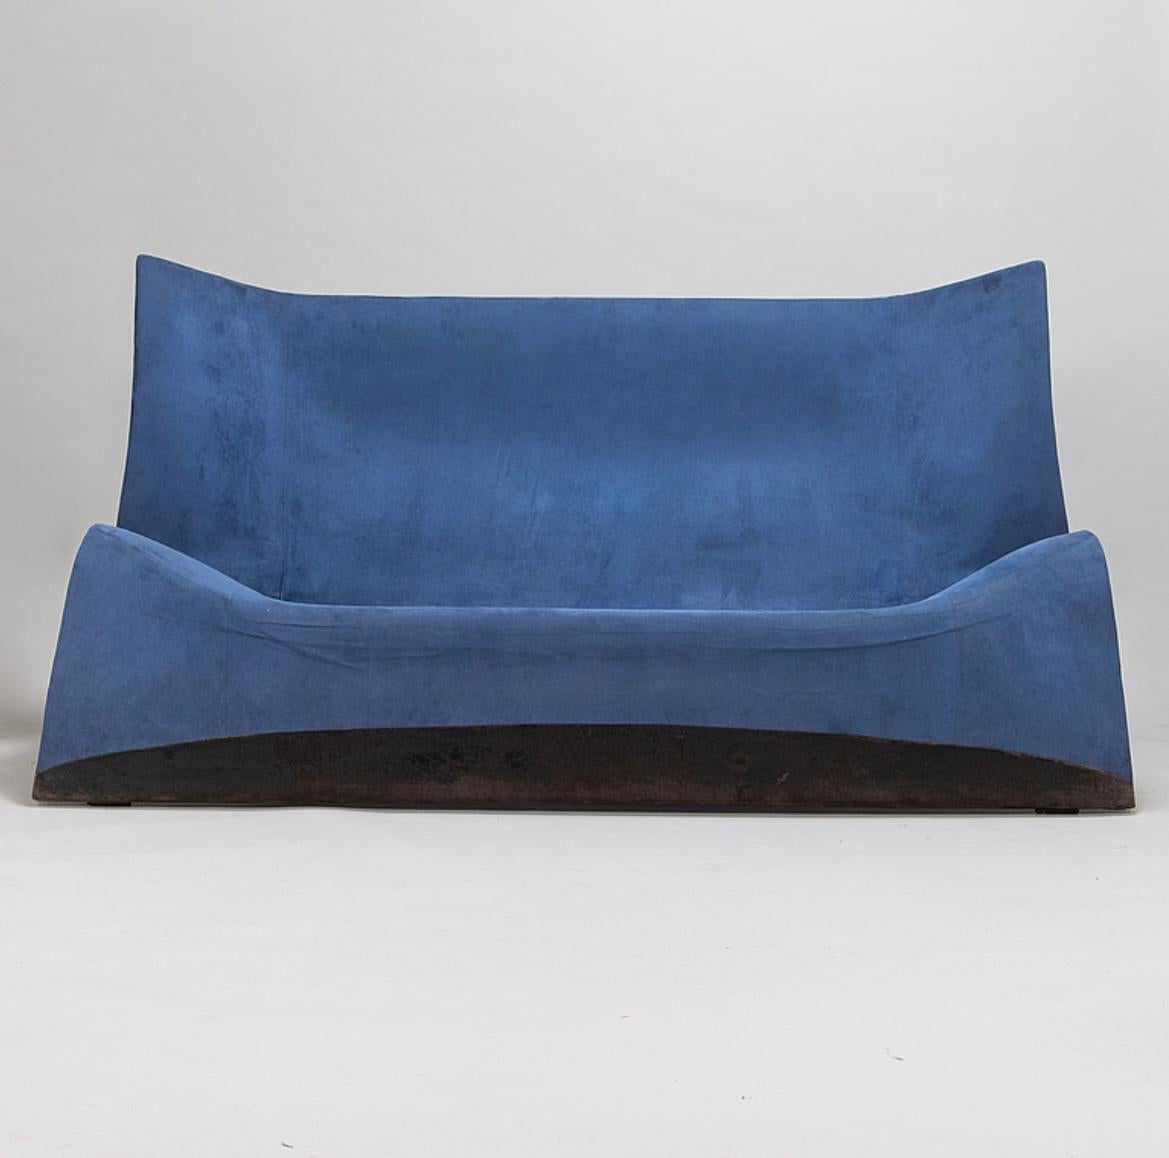 Designed to emulate the flowing, wavy architecture of a magic carpet, the “Alibaba” sofa by Oscar Tusquets Blanca is a rare and beautiful postmodern conversation piece. Spain, 1989.

Measures: Width 80 In (200 CM)
Depth 38 In (96 CM)
Height 40.5